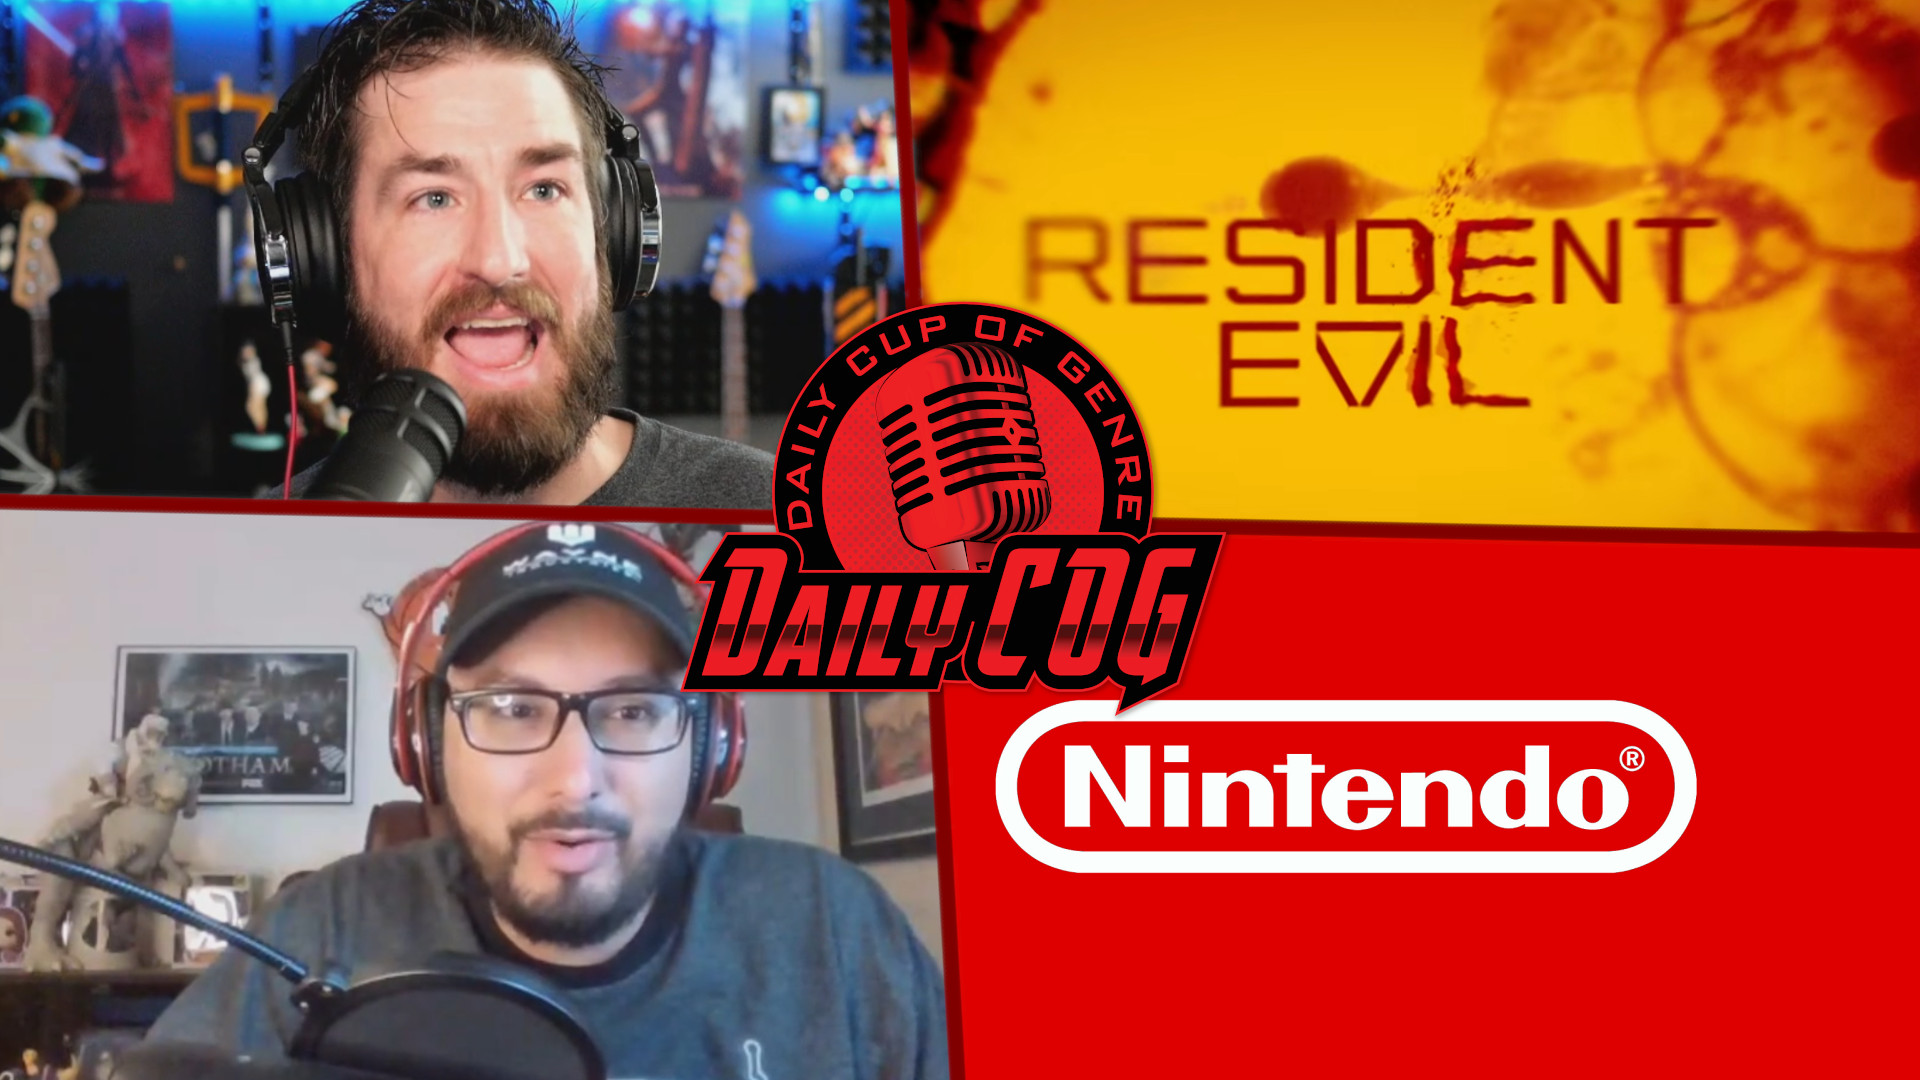 Netflix’s Resident Evil Review & Nintendo Pictures Is A Thing | Daily COG